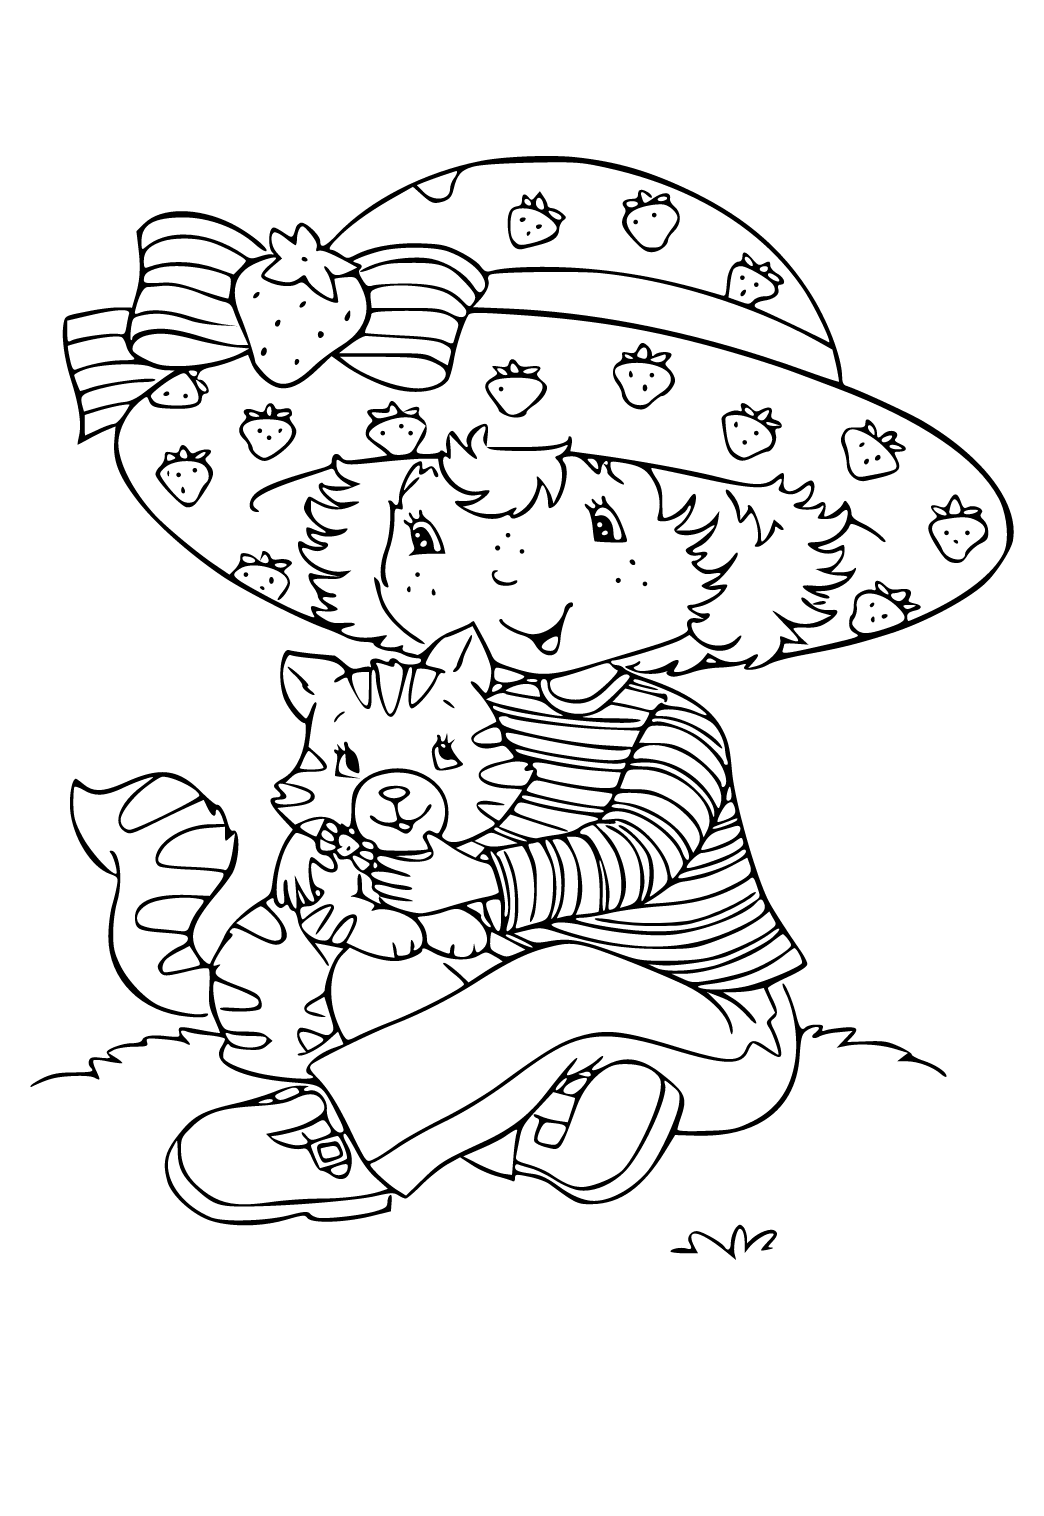 Free printable strawberry shortcake friends coloring page for adults and kids